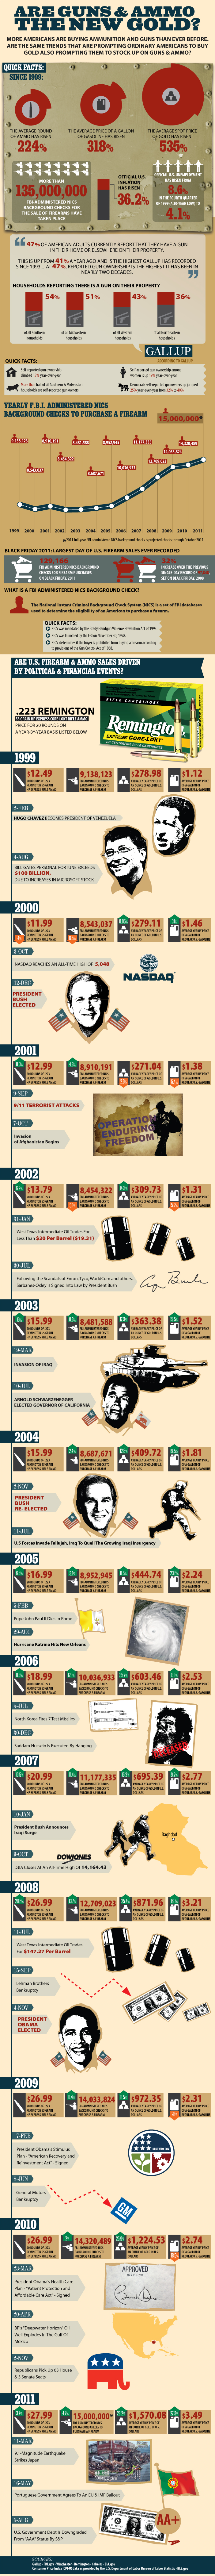 Are-Guns-Ammo-New-Gold-Full-Infographic